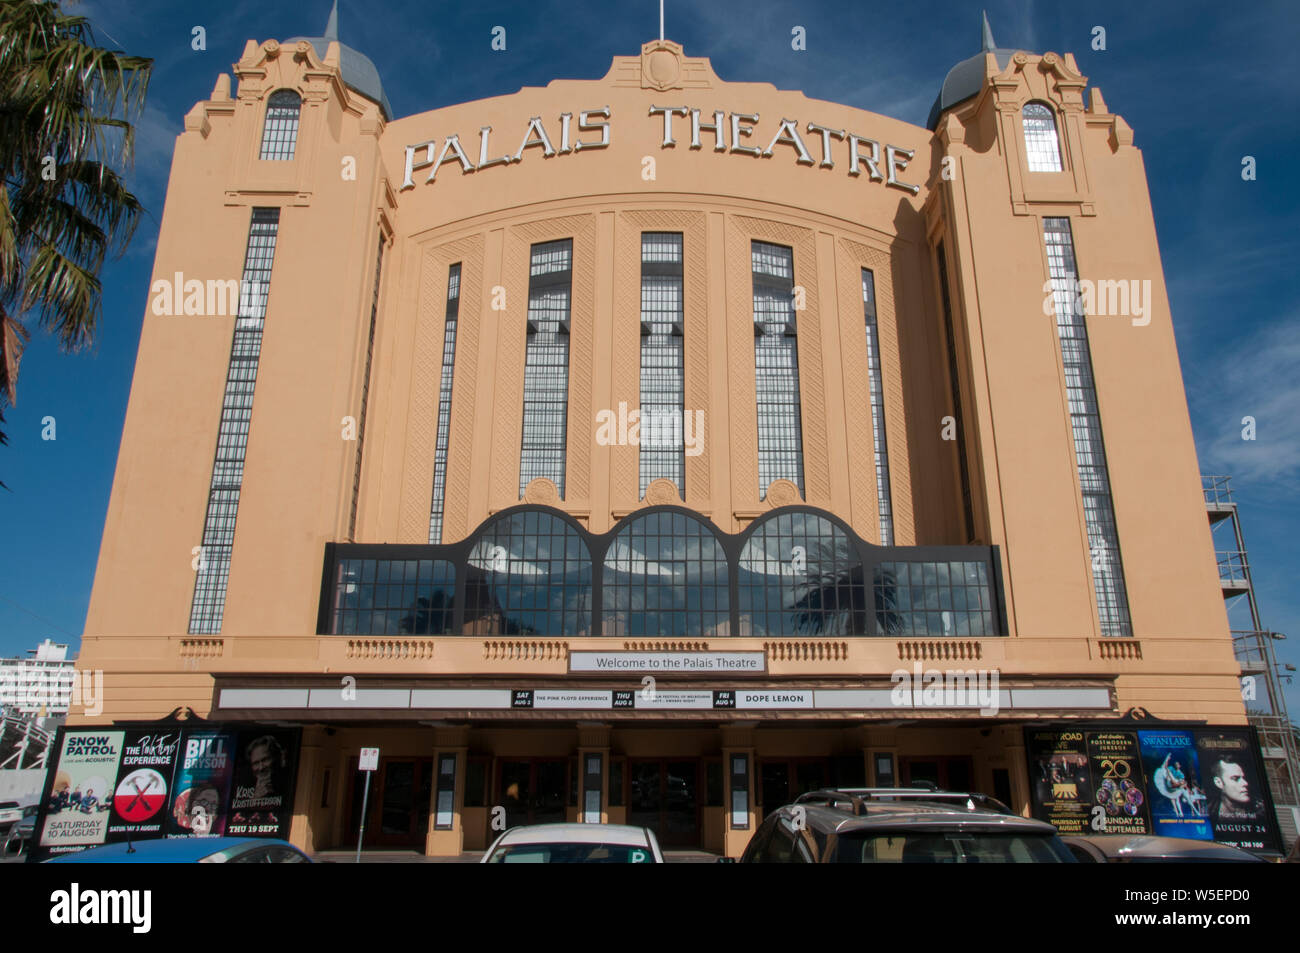 The 1920s Palais Theatre, St Kilda, Melbourne, an iconic live music venue, newly renovated as at July 2019 Stock Photo